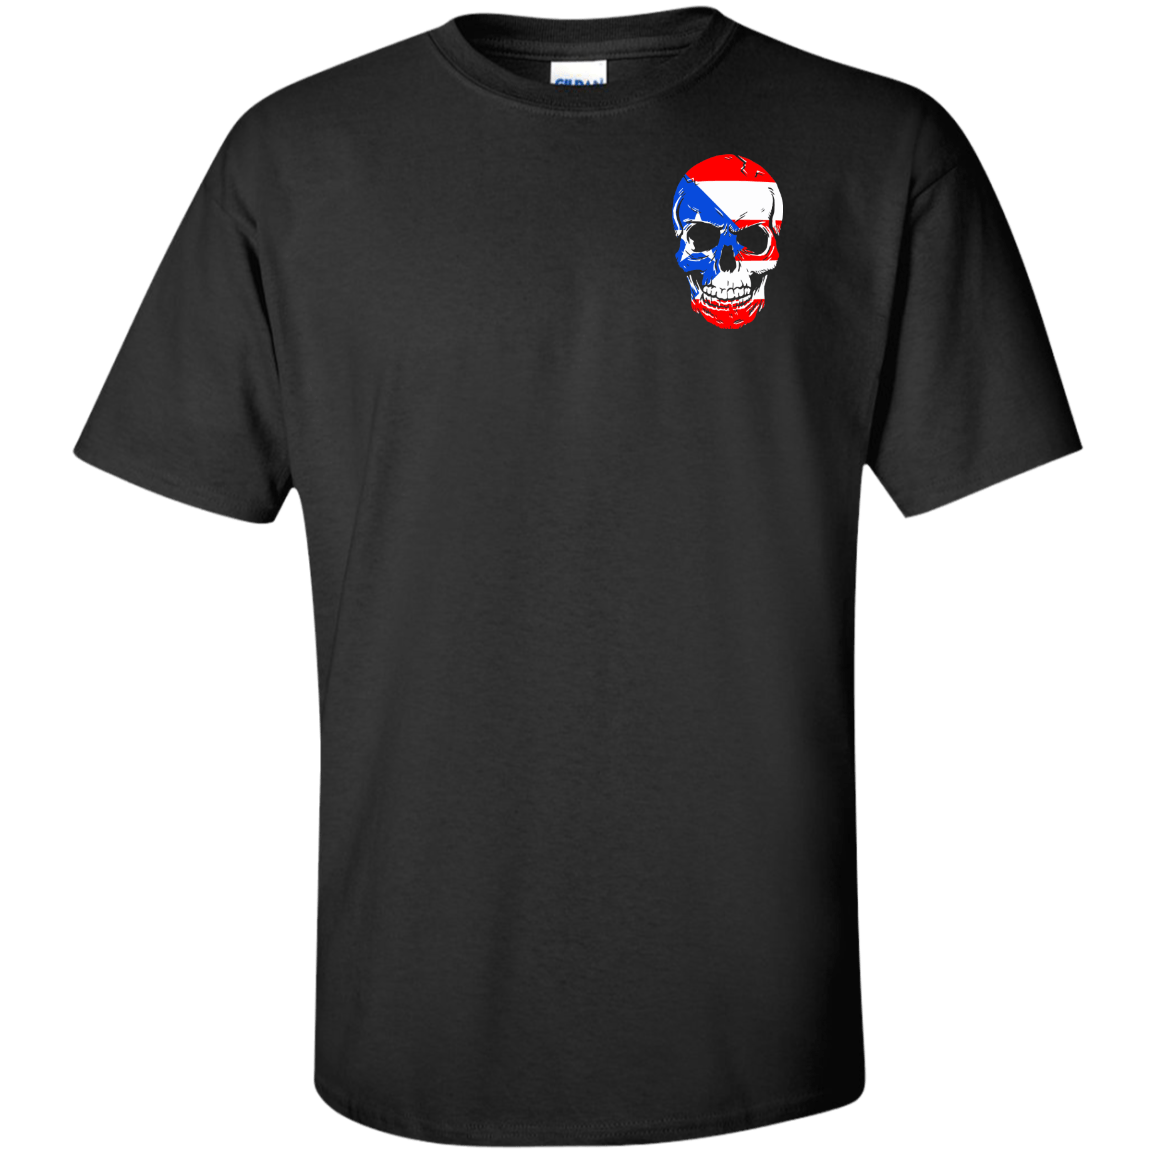 My Birthplace, My Blood – Puerto Rican Pride